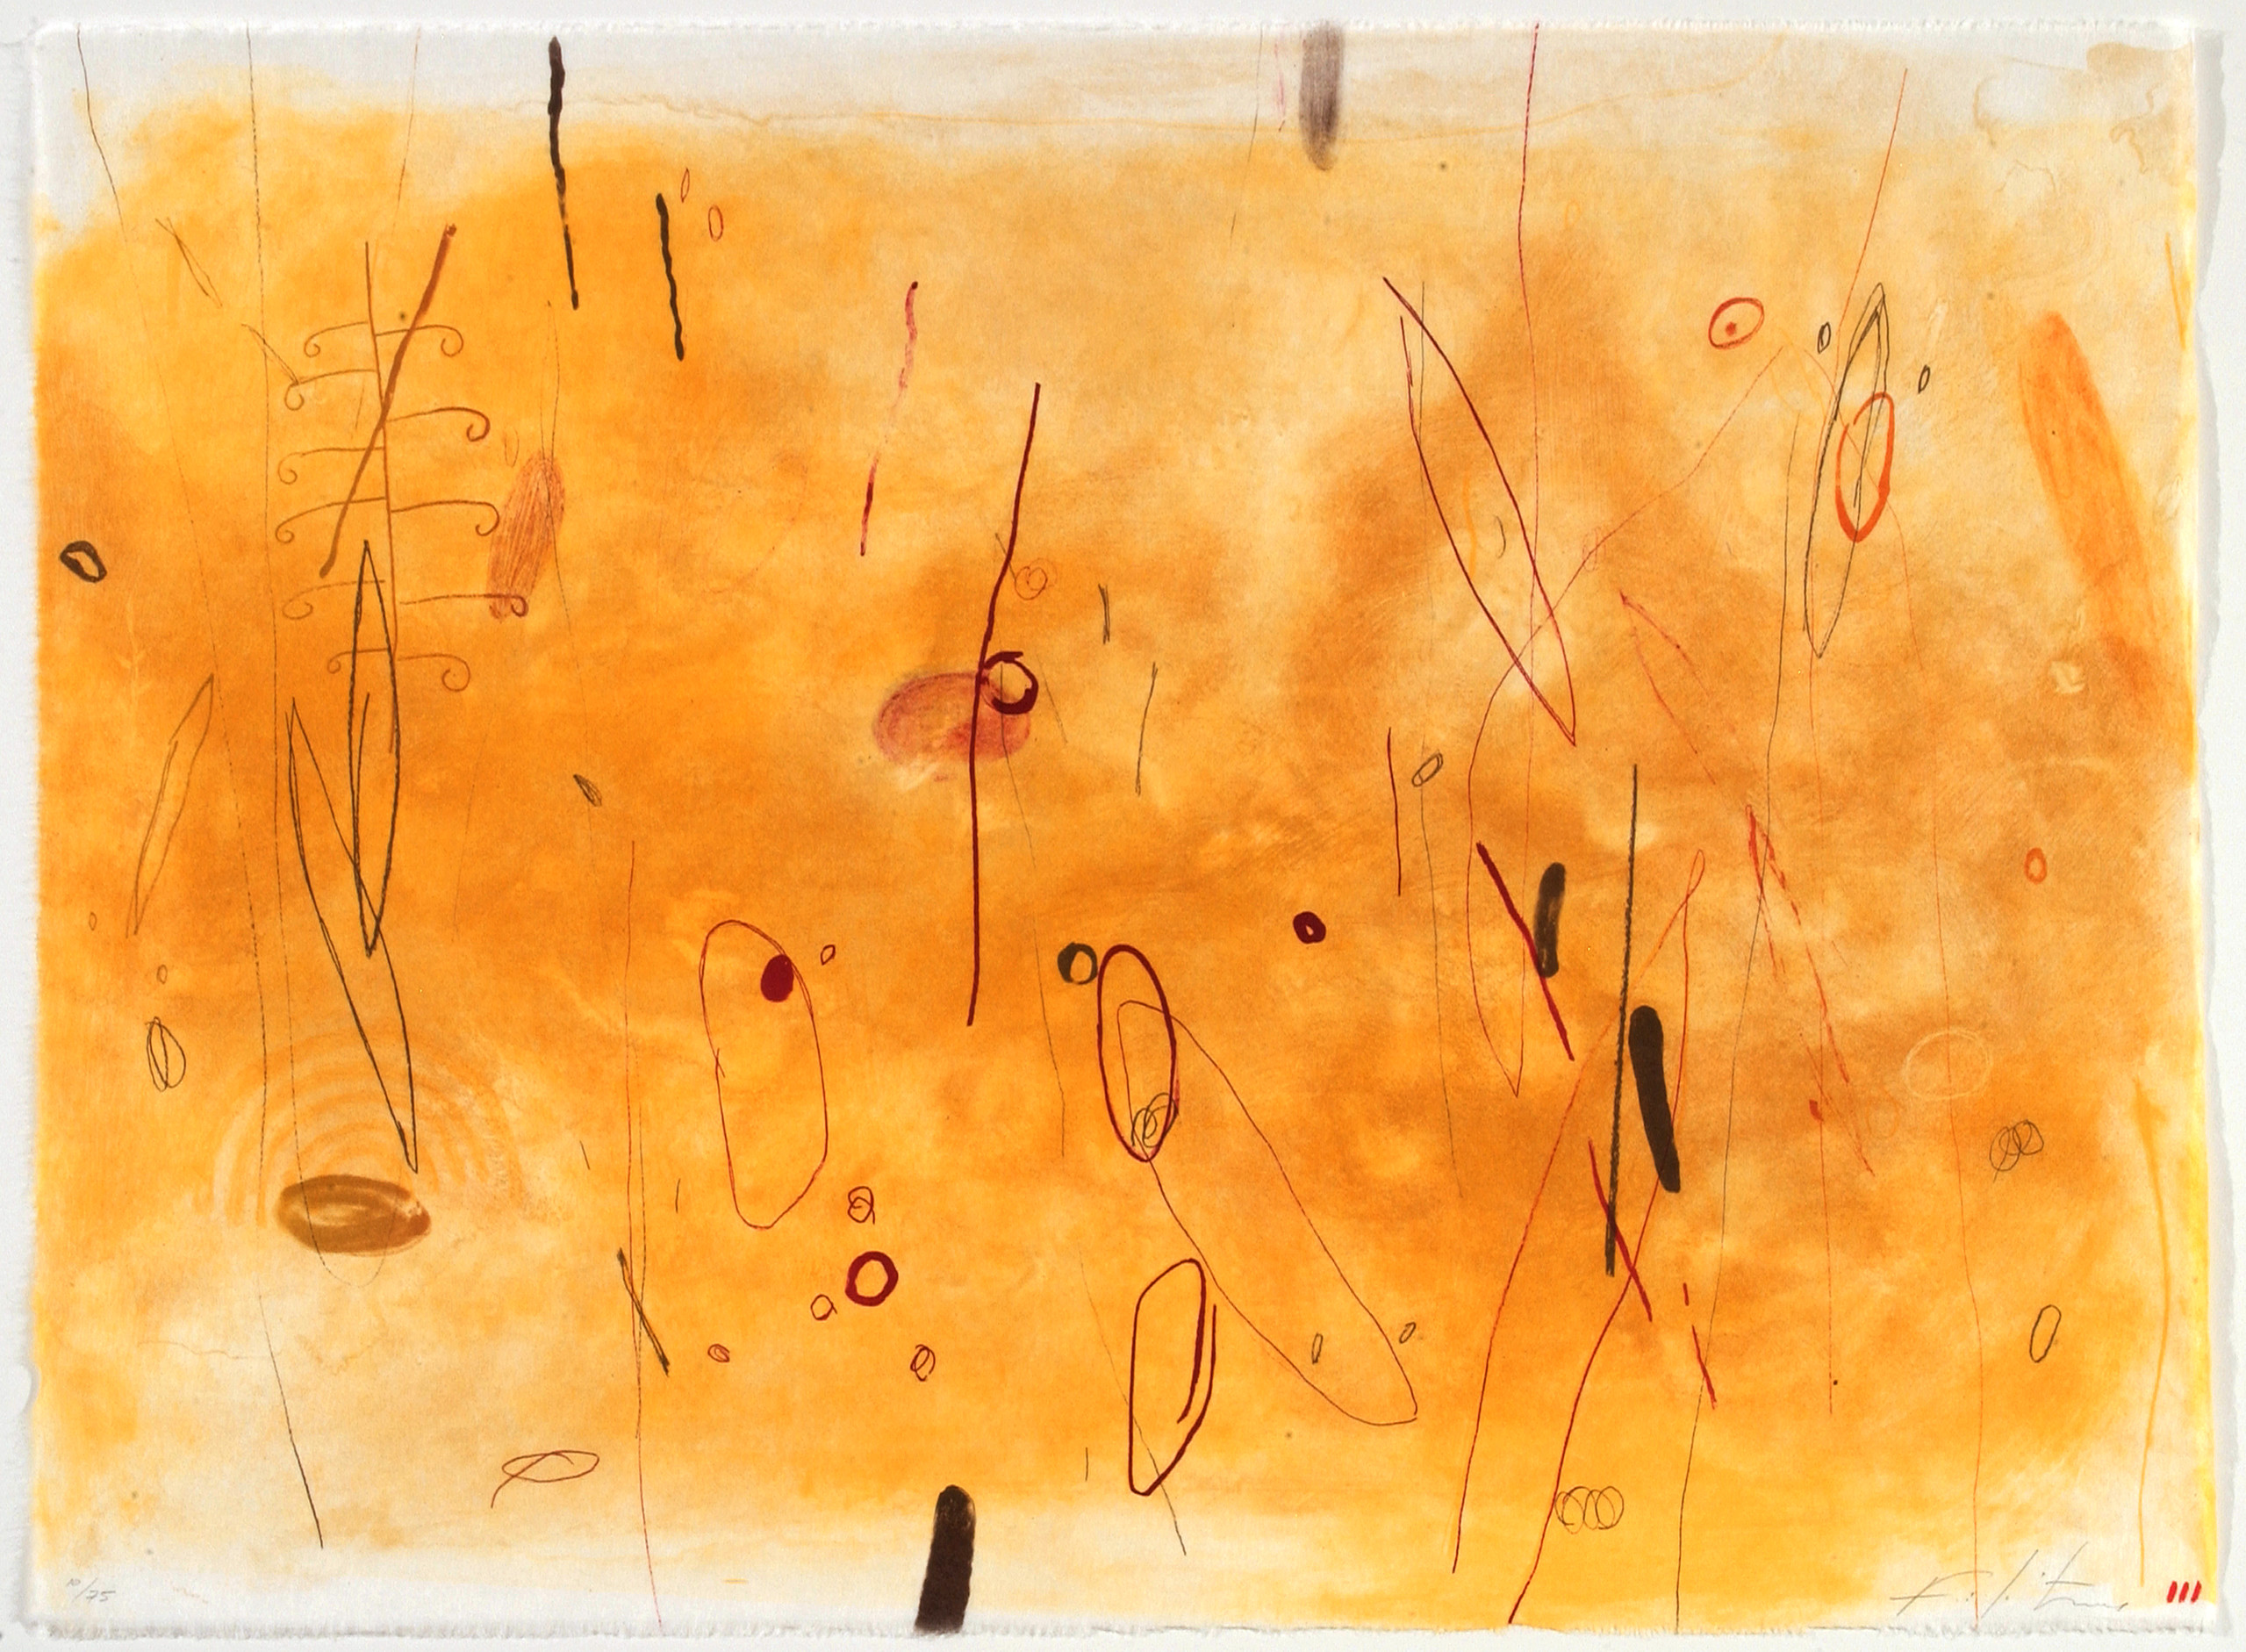 Goldenrod yellow paint smudged across white paper in layers, creating different levels of opacity. Vertical red and black lines, and a few red and black shape outlines, mostly of tall ovals, are painted sporadically on the paper.